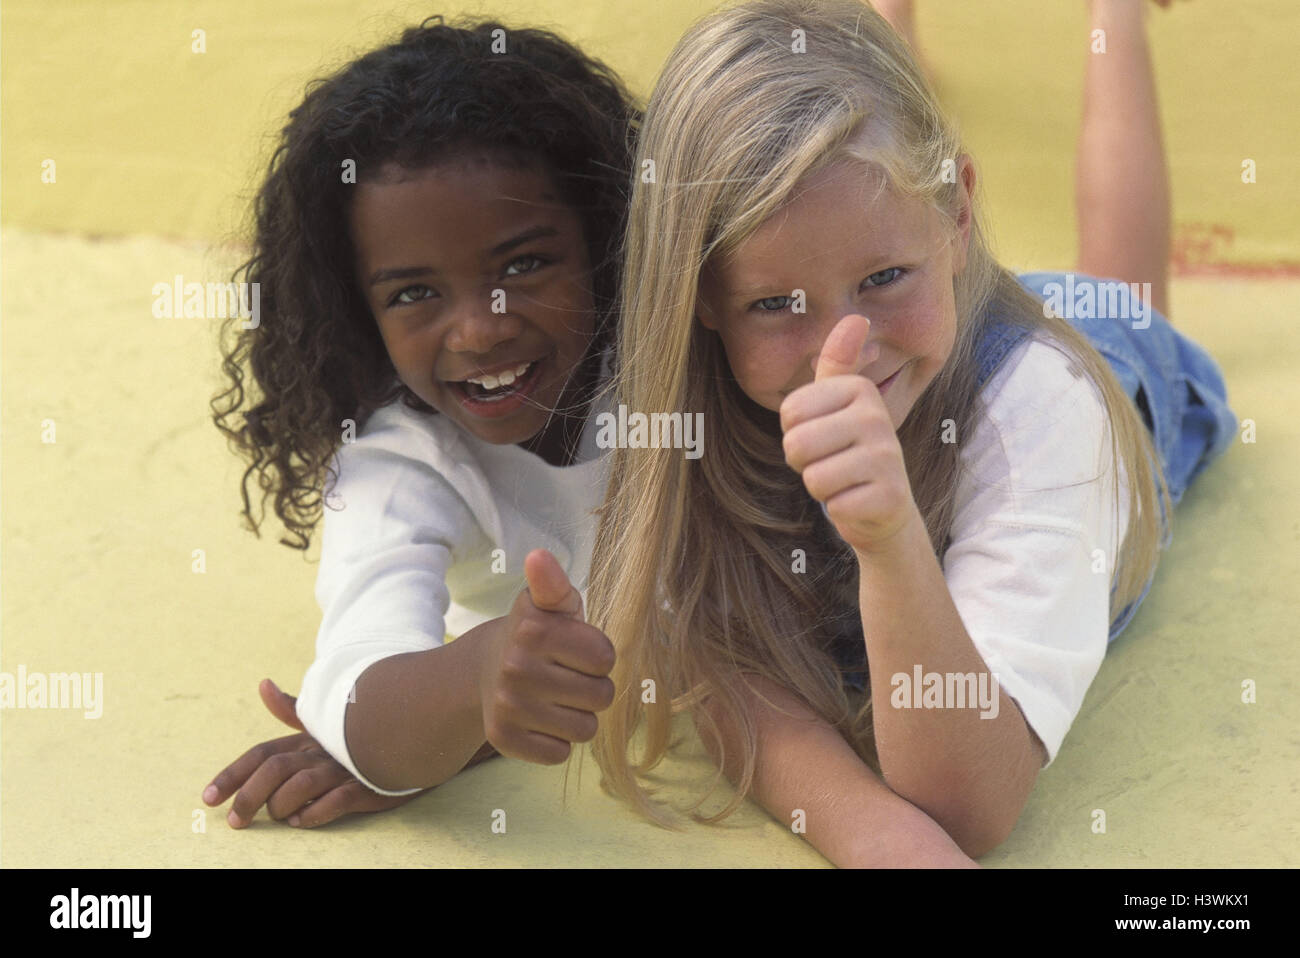 Girls, different colour of skin, lie, play gesture, 'pollex high' friends, friendship, friends, nationality, differently, non-whites, whiteness, children, blond, dark-haired, childhood, fun, cheerfulness, satisfaction, happy, cohesion, inside Stock Photo